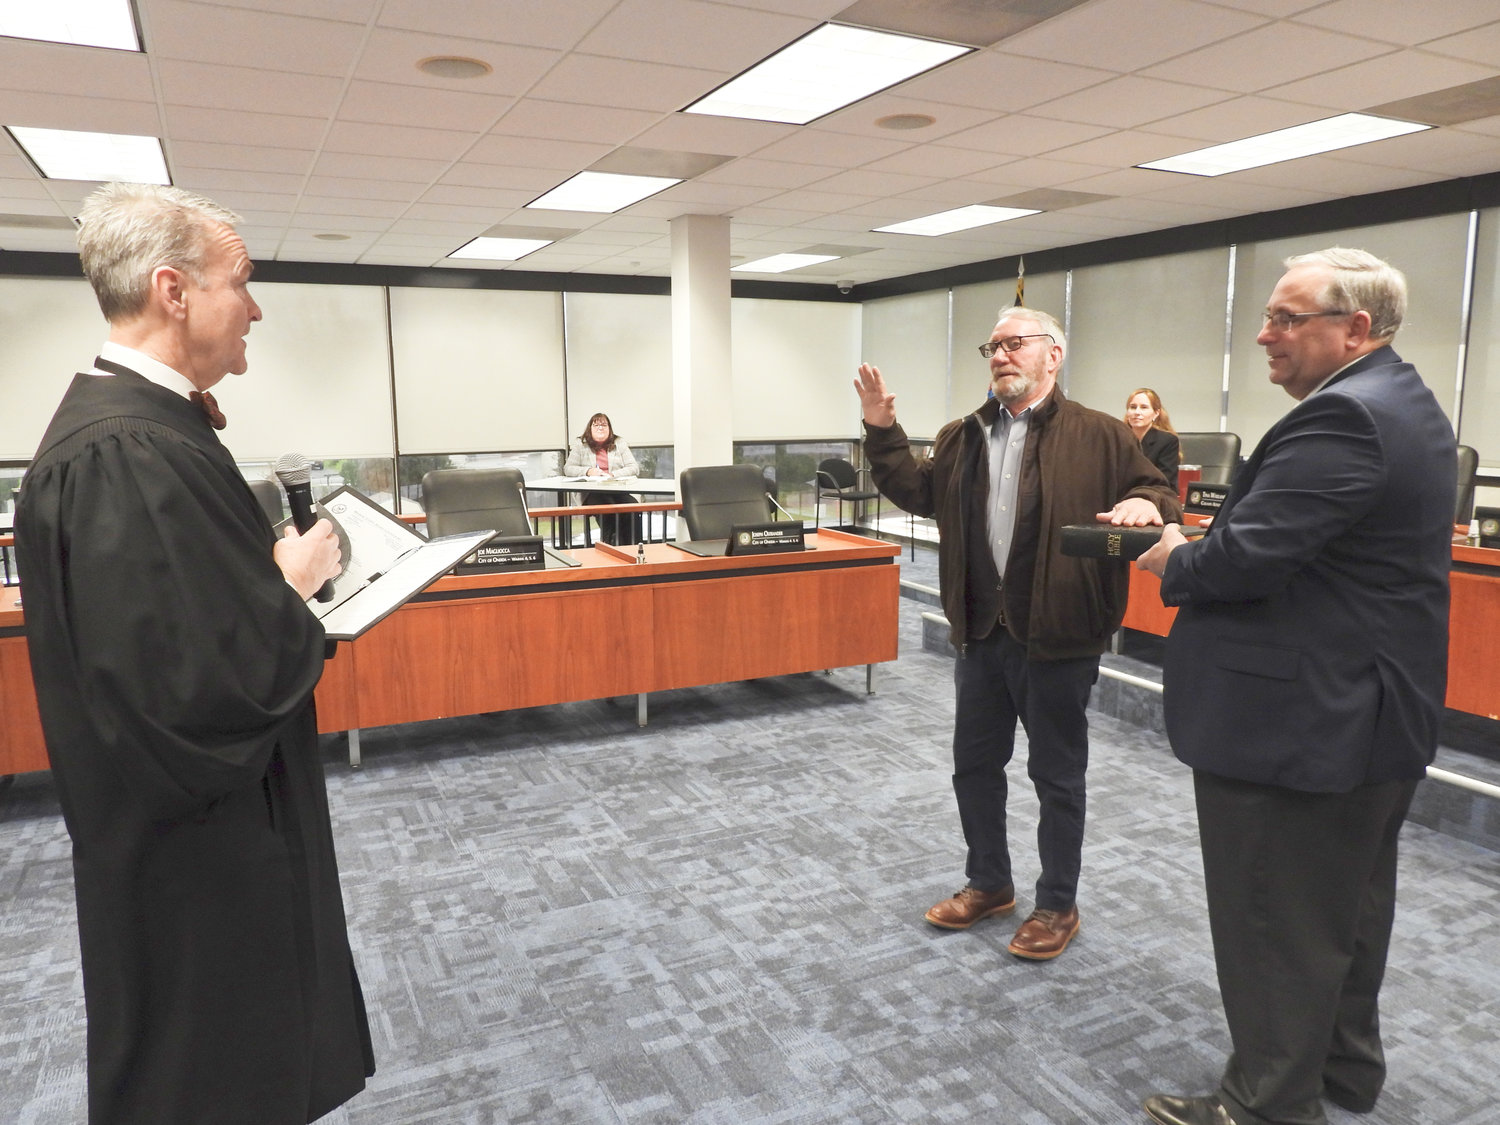 LINCOLN COUNCILOR — Doug Fusilo, center, is sworn in as one of the Lincoln councilors. Fusilo is sworn in by Judge Patrick O'Sullivan, who was recently elected as a justice of the supreme court for the 6th Judicial District. Madison County Chairman John Becker holds the Bible.